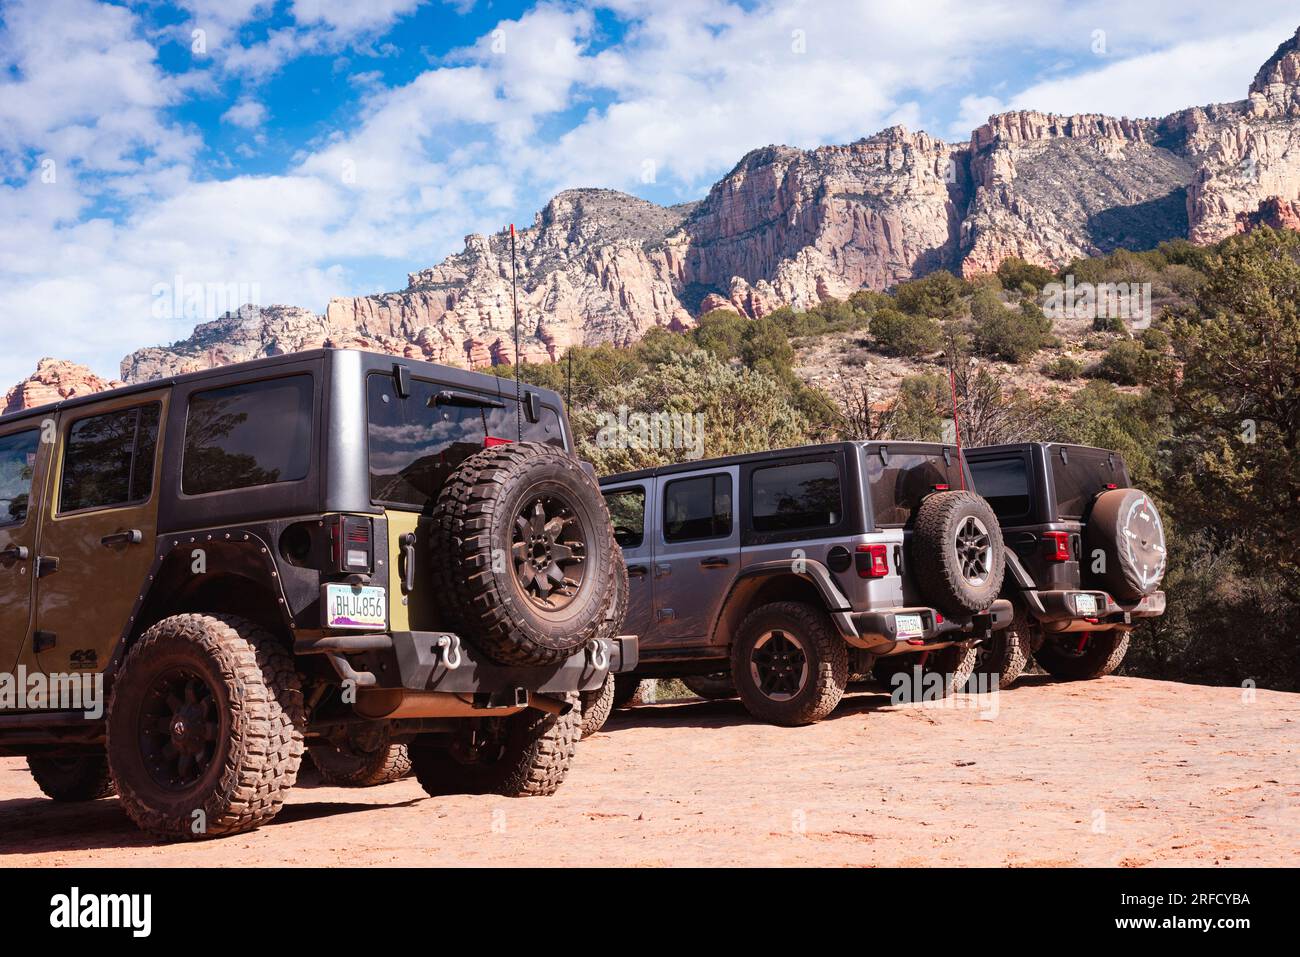 4x4 cars parked up on an off road trail in the red rocks state park in Sedona Arizona Stock Photo